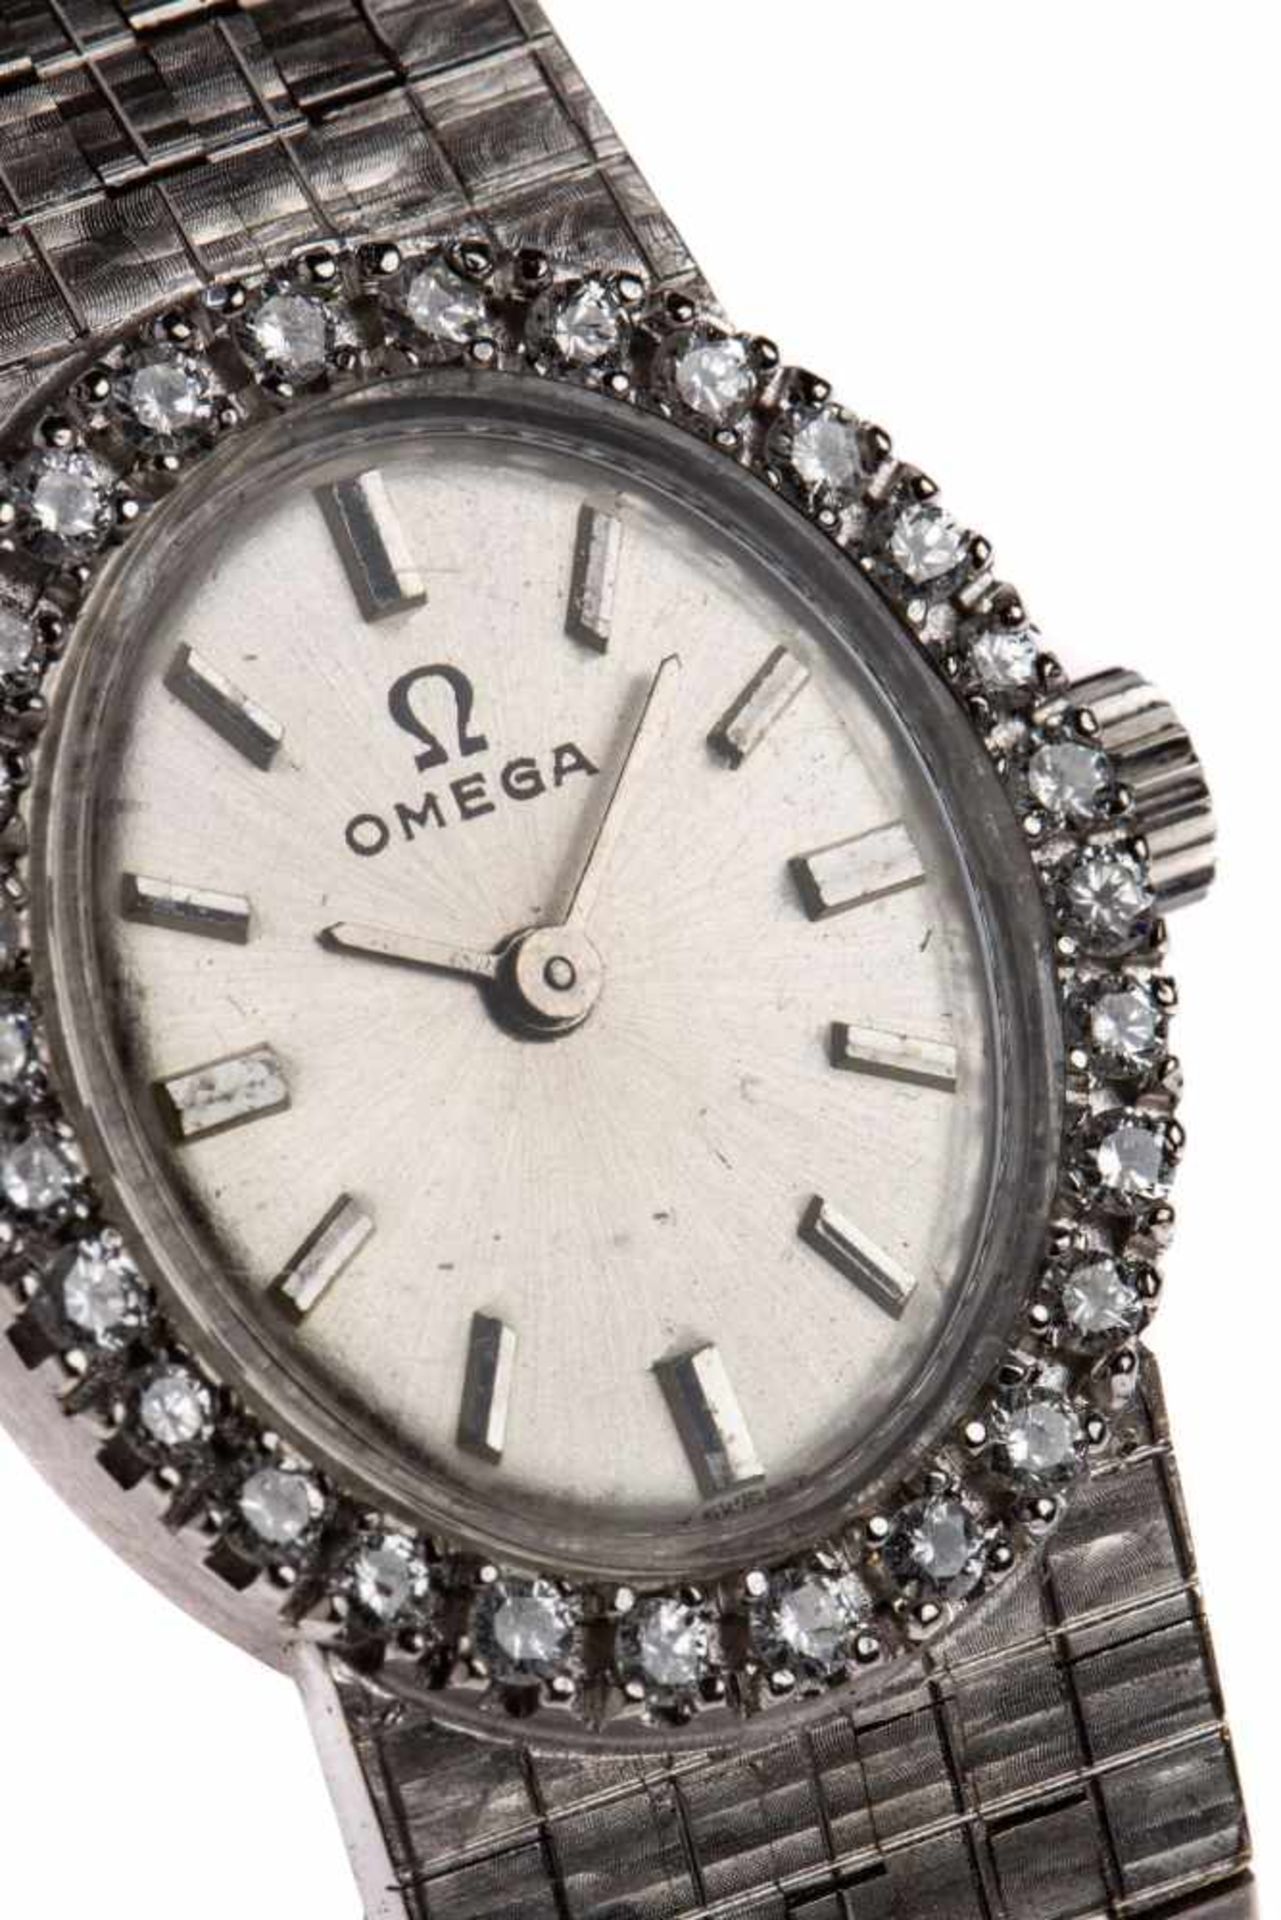 Omega whitegold ladies watch18kt white gold ladies' watch handwinding from the 70s with daimond - Bild 2 aus 2